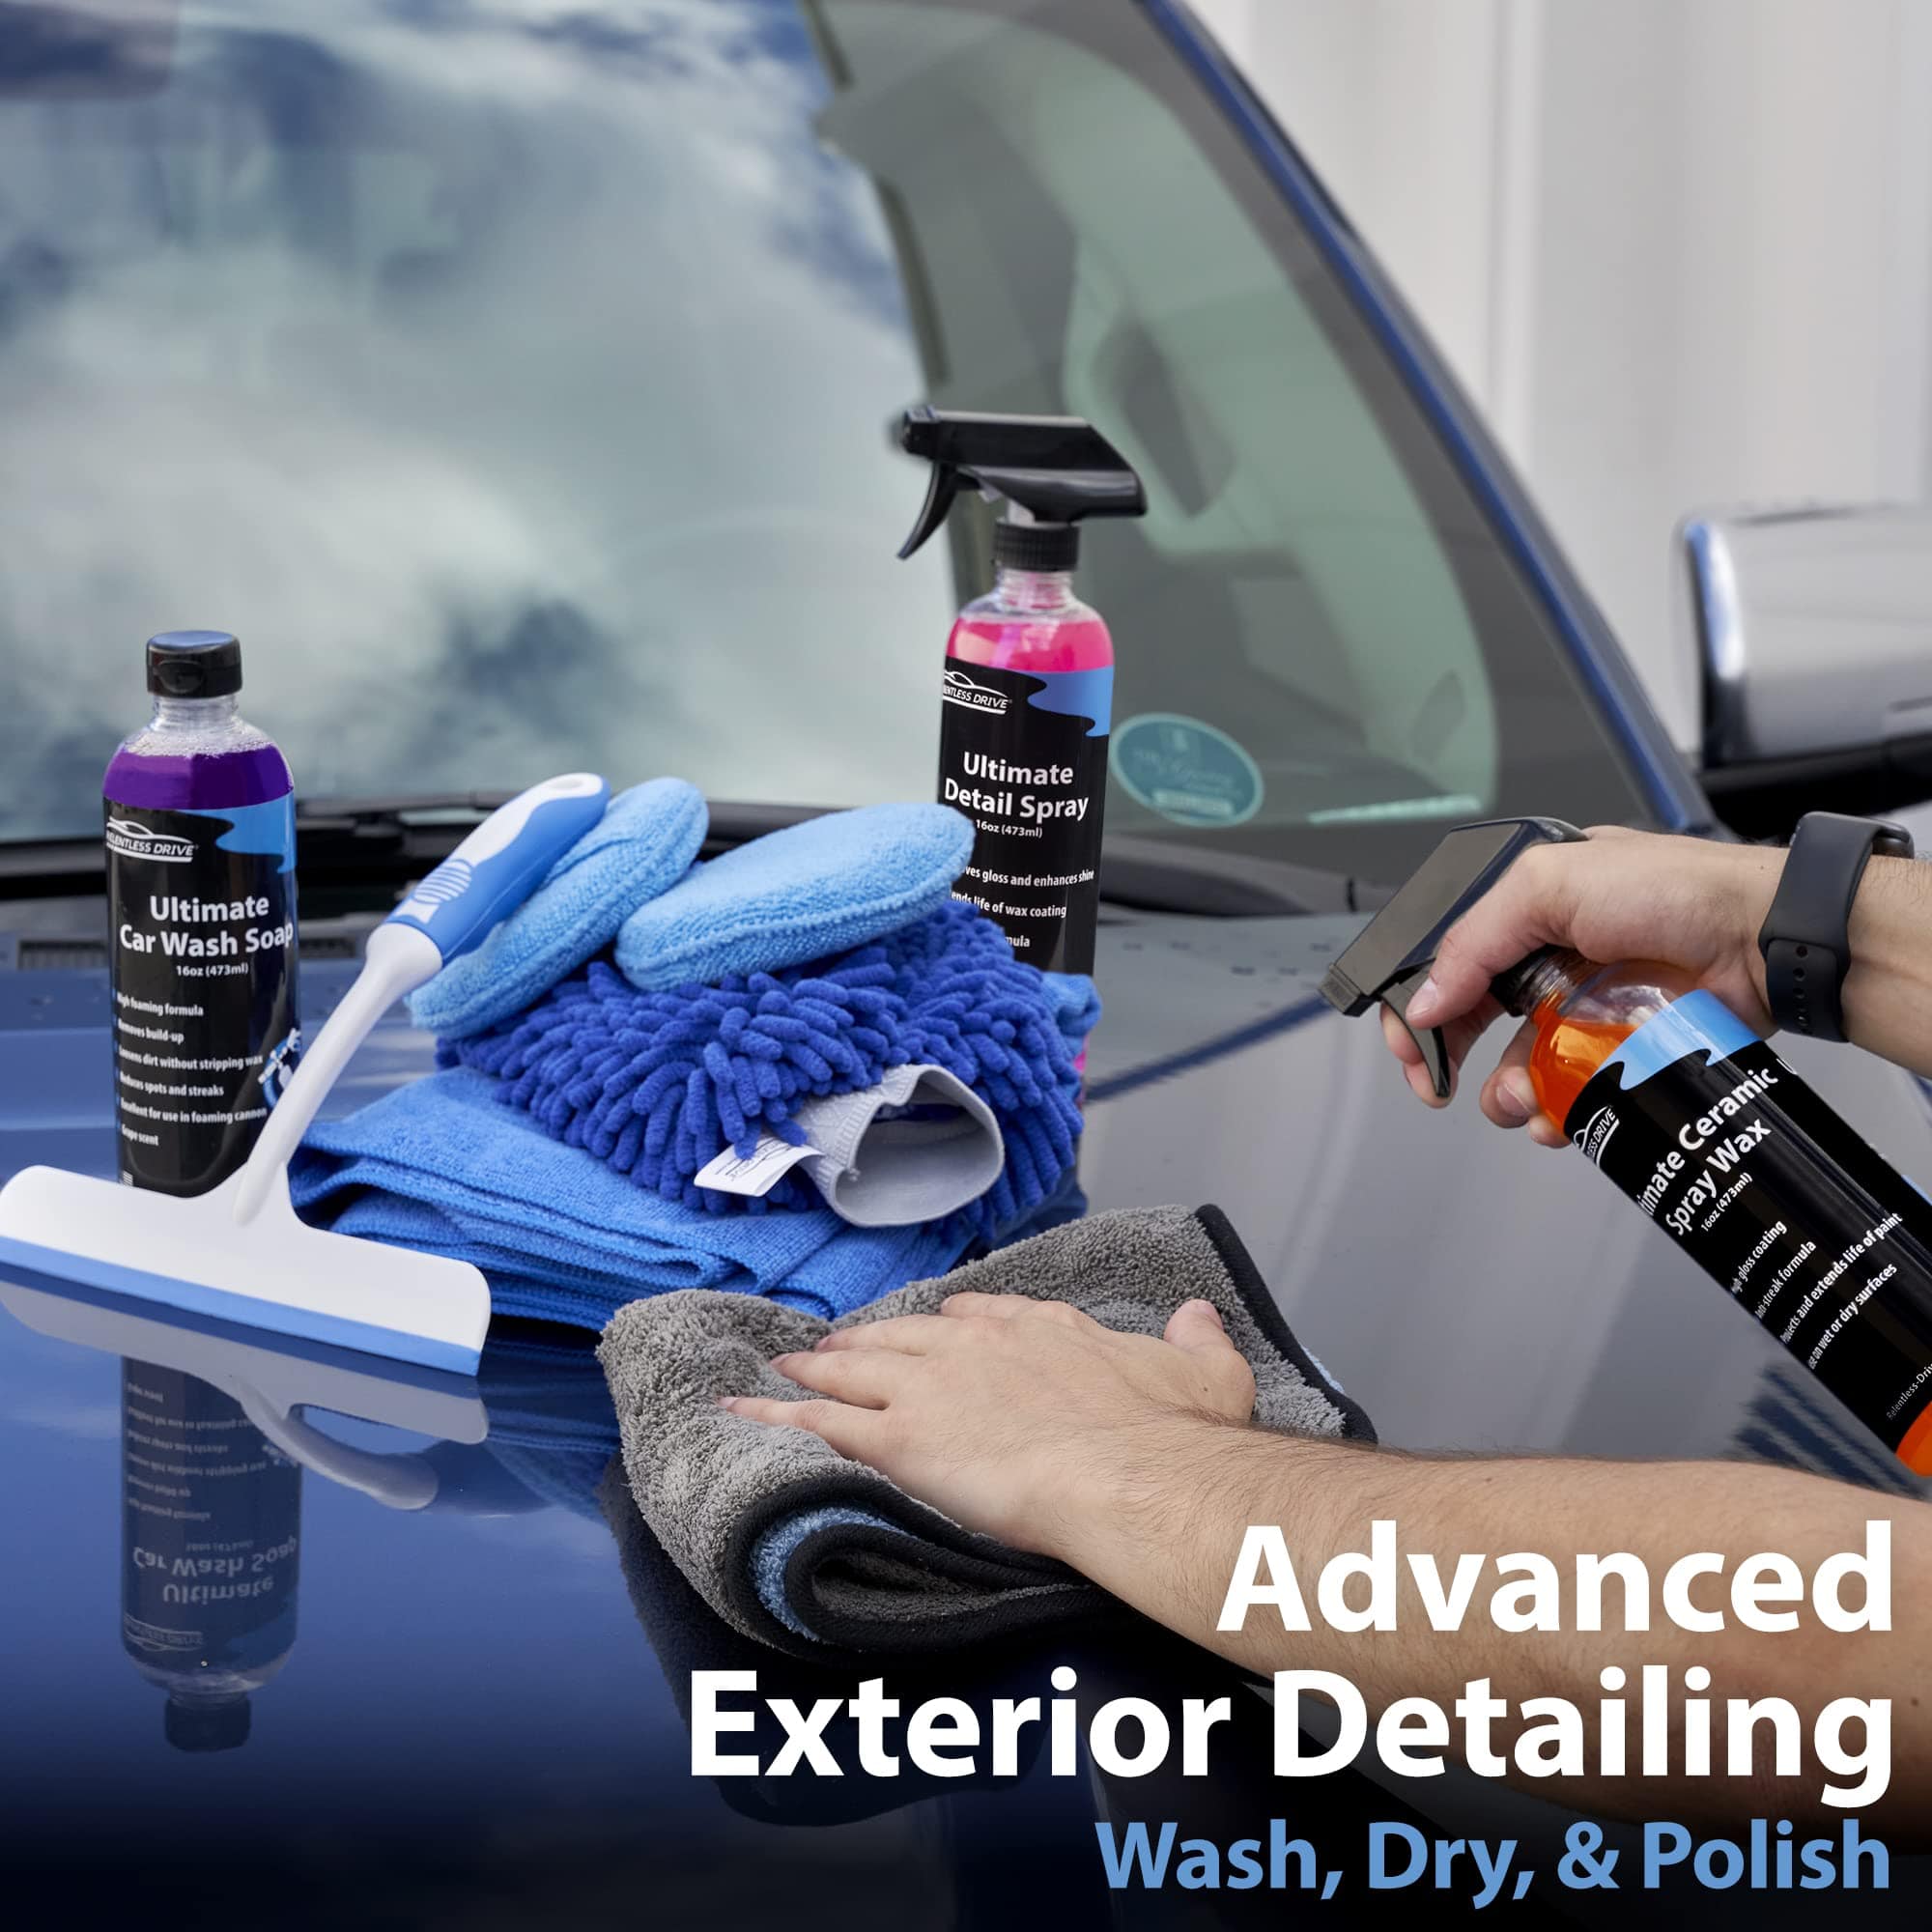 https://relentless-drive.com/cdn/shop/files/relentless-drive-car-wash-kit-20pc-car-detailing-car-cleaning-kit-complete-car-wash-kit-with-bucket-car-wash-supplies-built-for-the-perfect-car-wash-relentless-drive-microfiber-bug-sp_96d35f44-5285-4b62-9279-1898783bd378_1024x1024@2x.jpg?v=1686671708